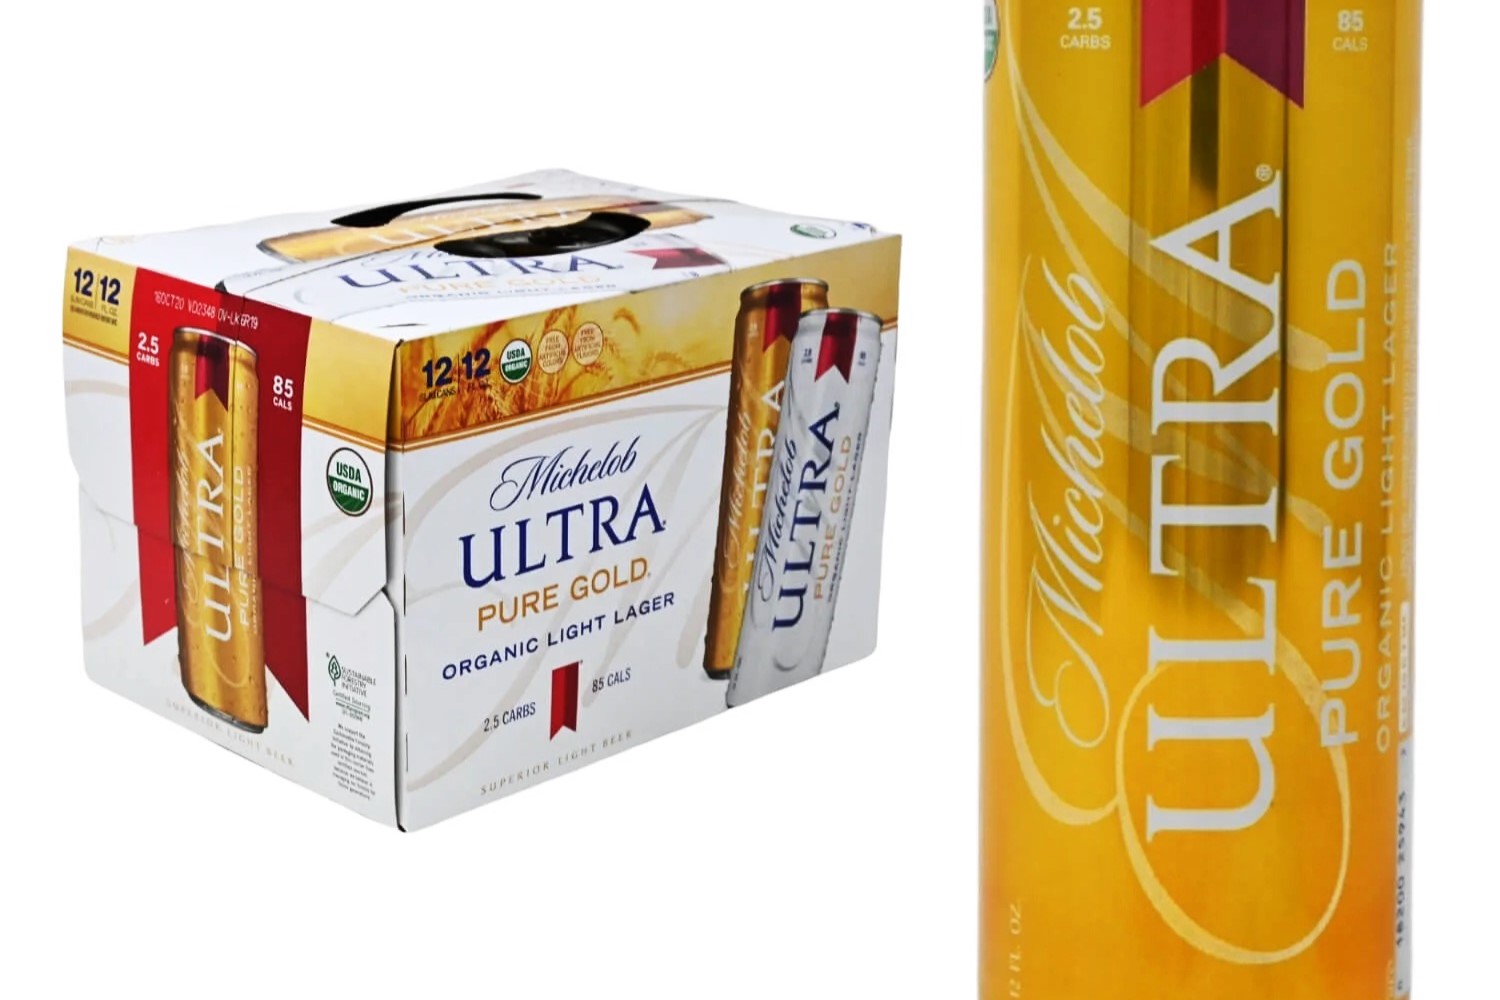 10 Michelob Ultra Pure Gold Nutrition